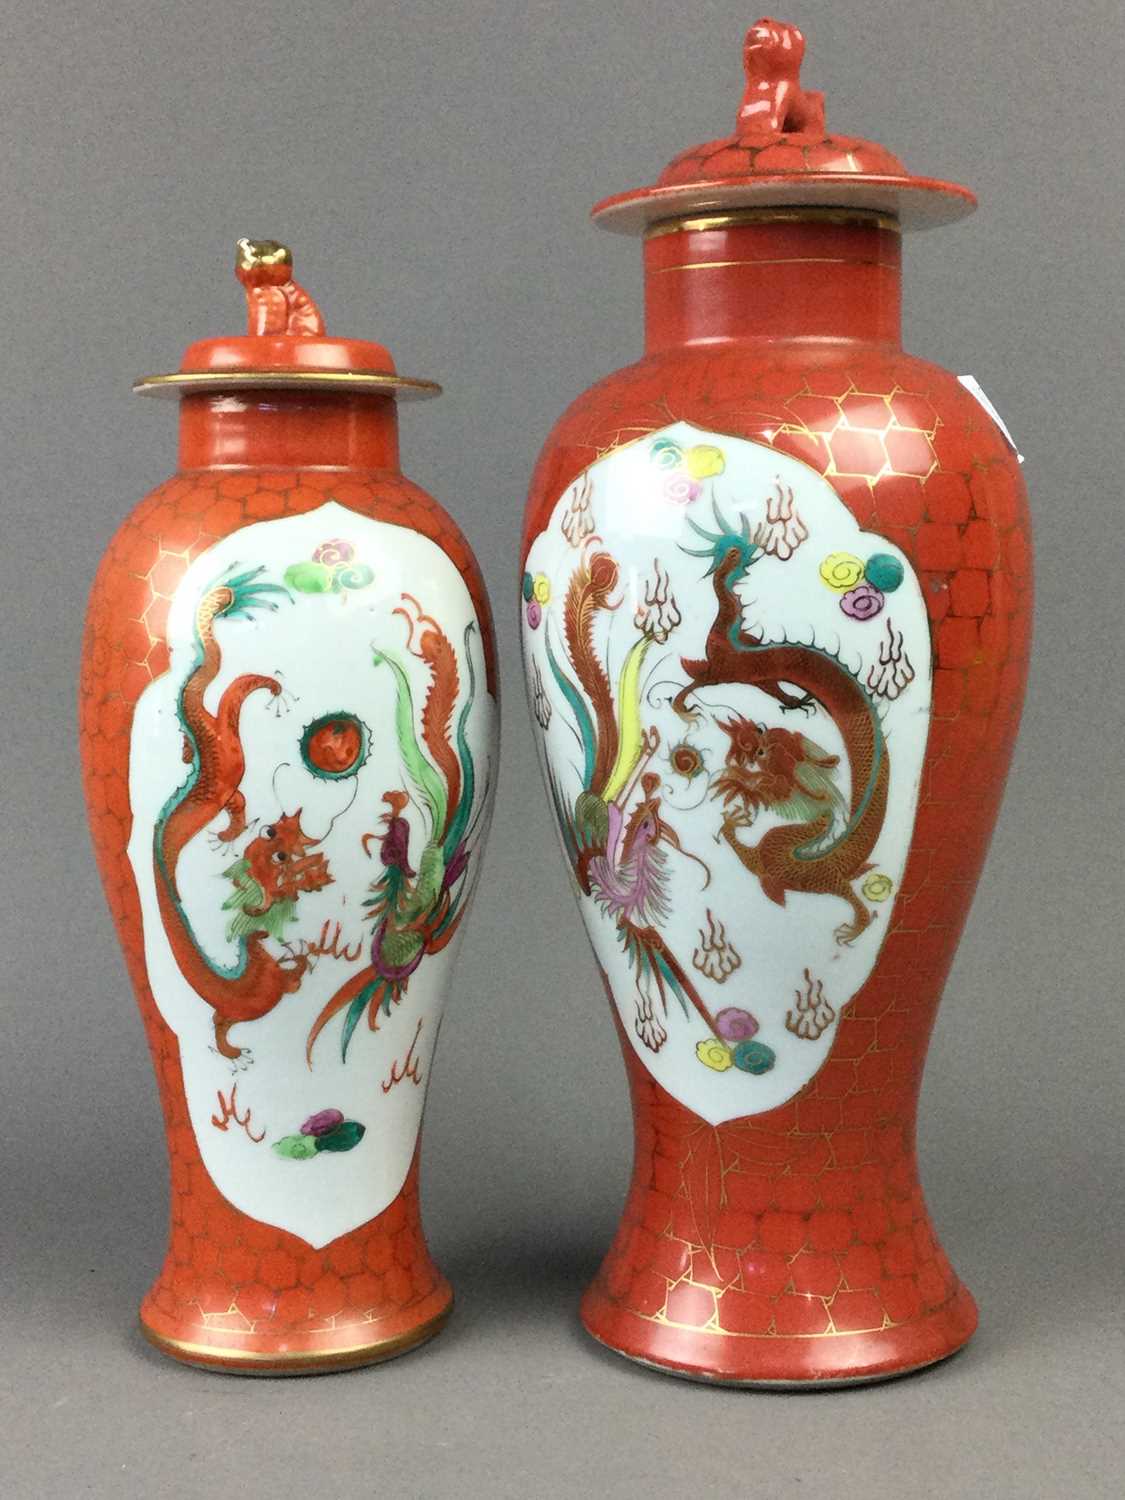 Lot 98 - A LOT OF TWO JAPANESE KUTANI STYLE VASES WITH COVERS